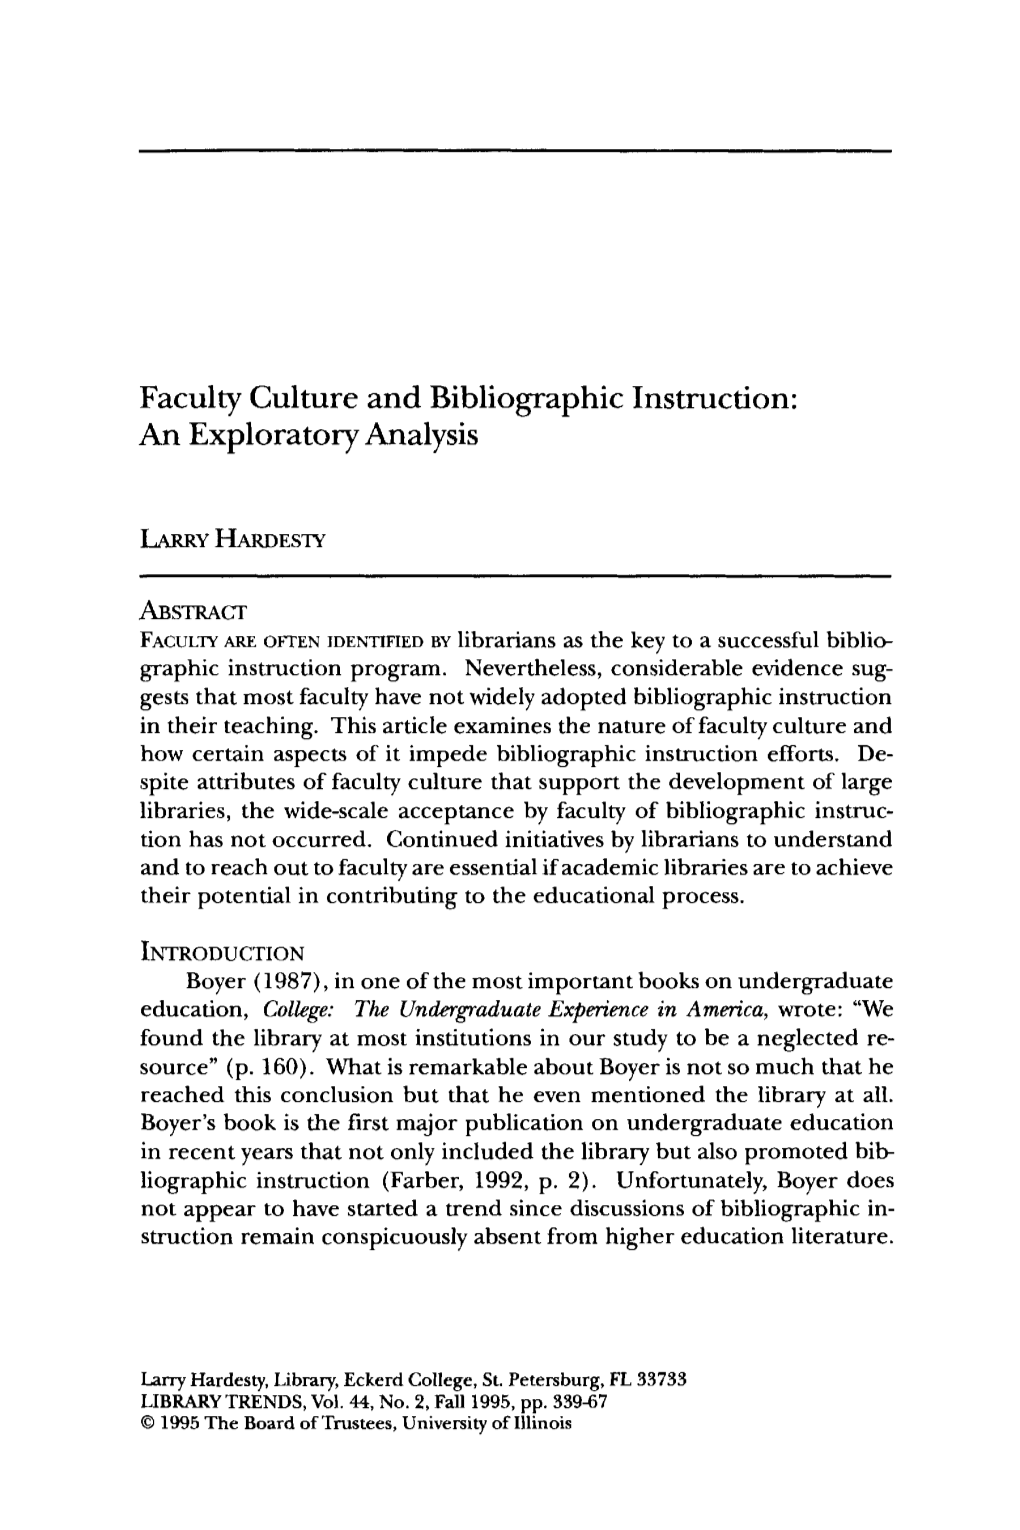 Faculty Culture and Bibliographic Instruction: an Exploratory Analysis